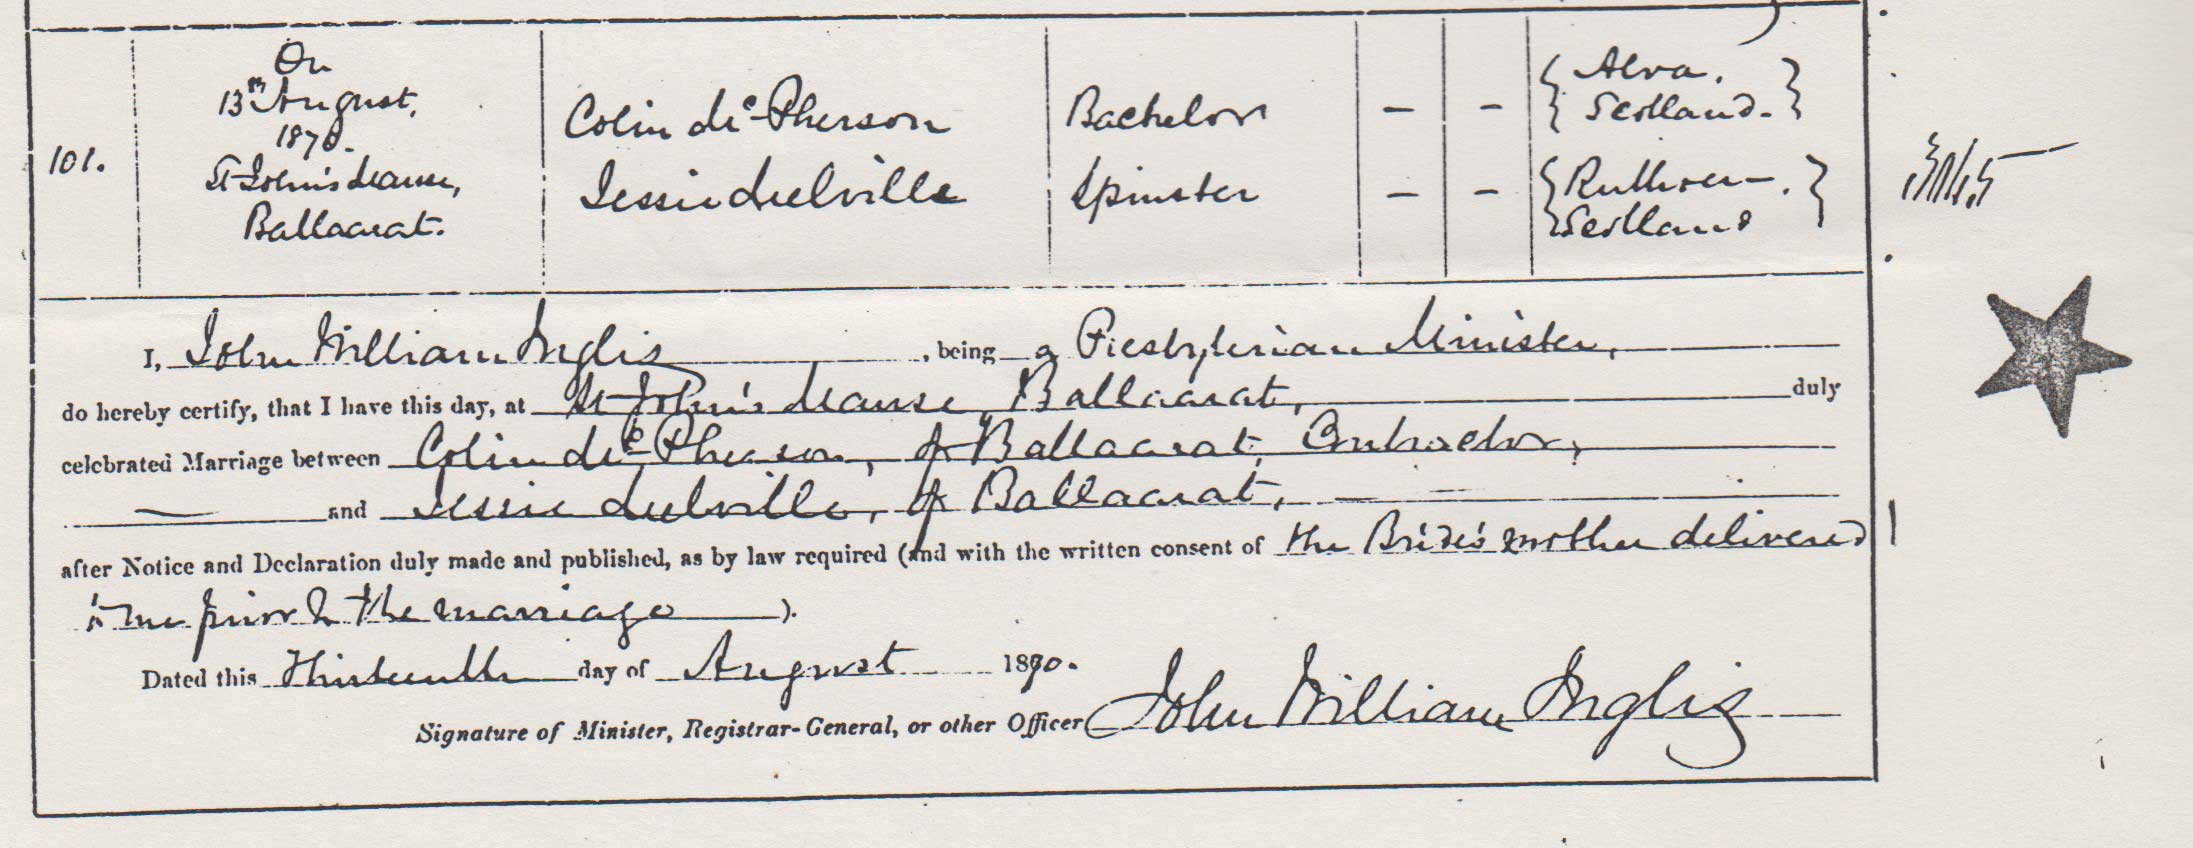 Colin McPherson and Jessie Melville marriage certificate part 1